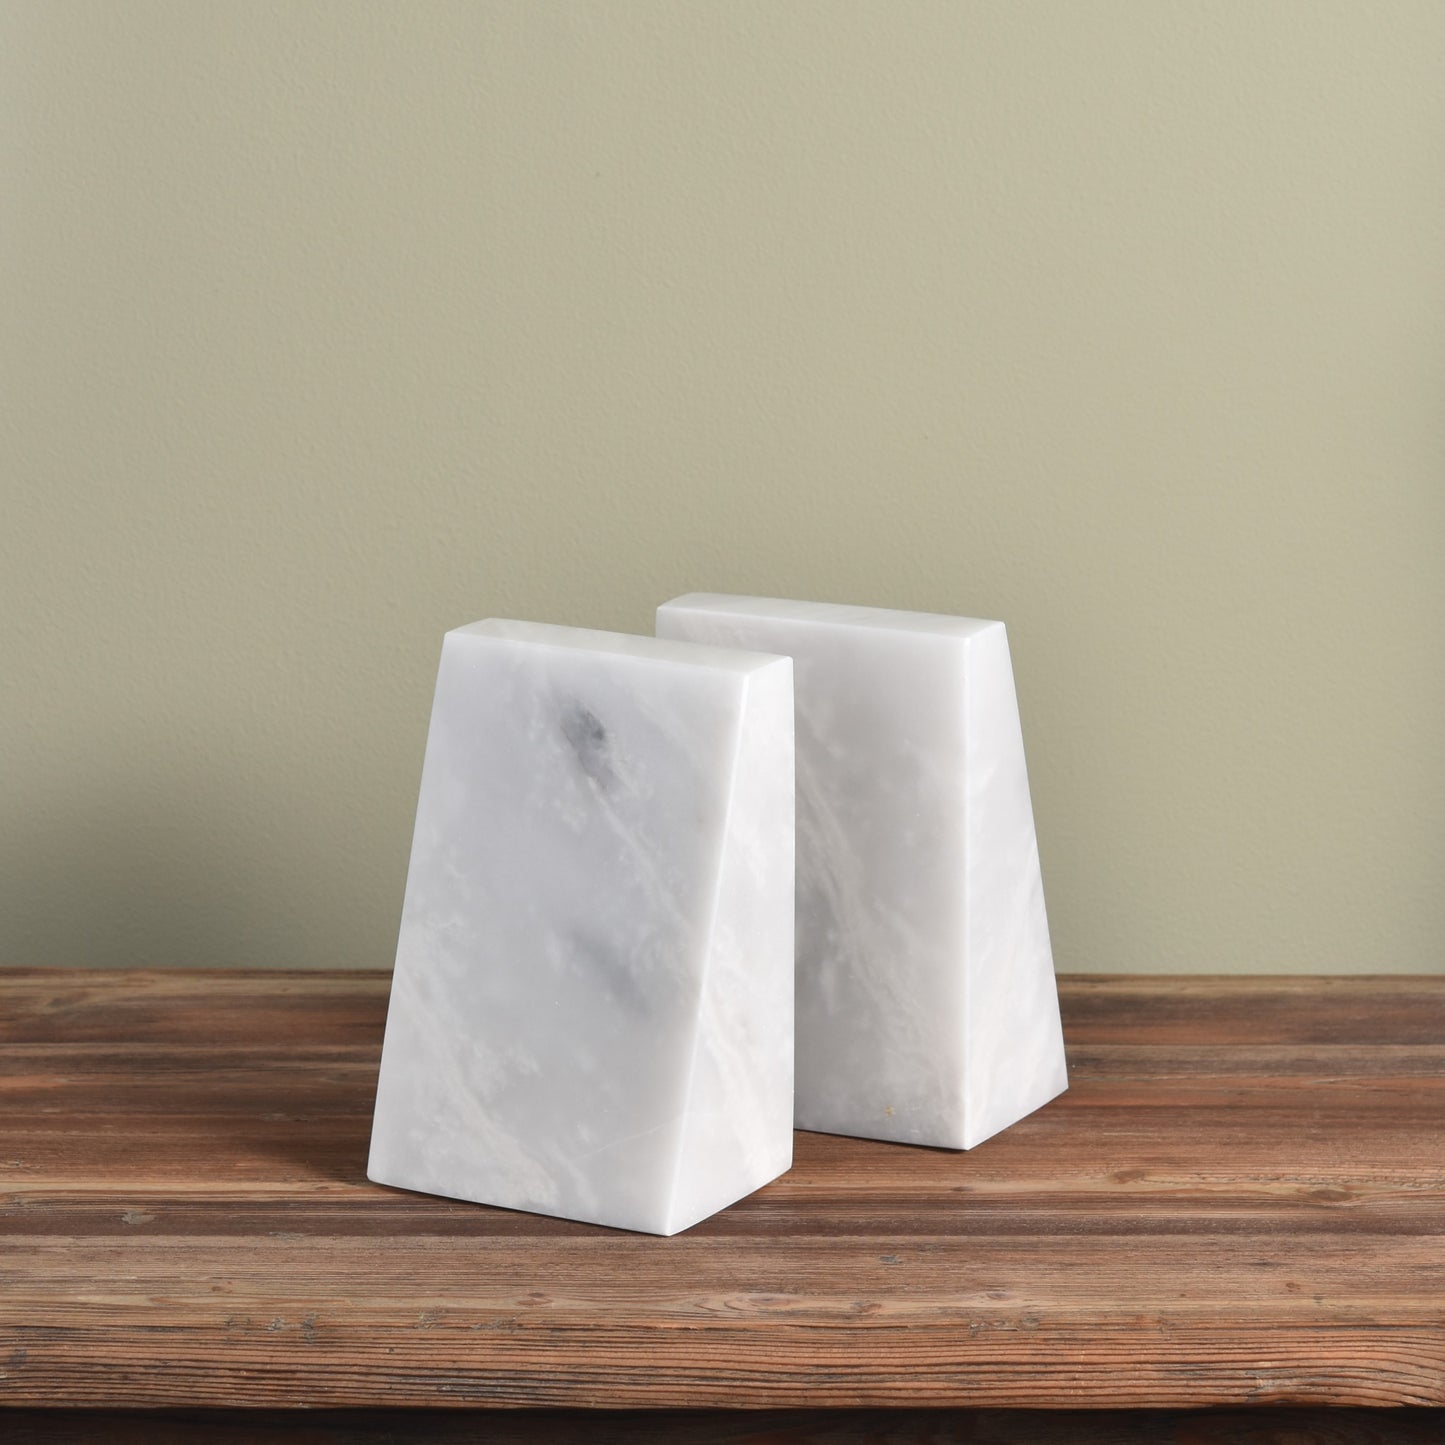 Solid Marble Bookends - White Marble